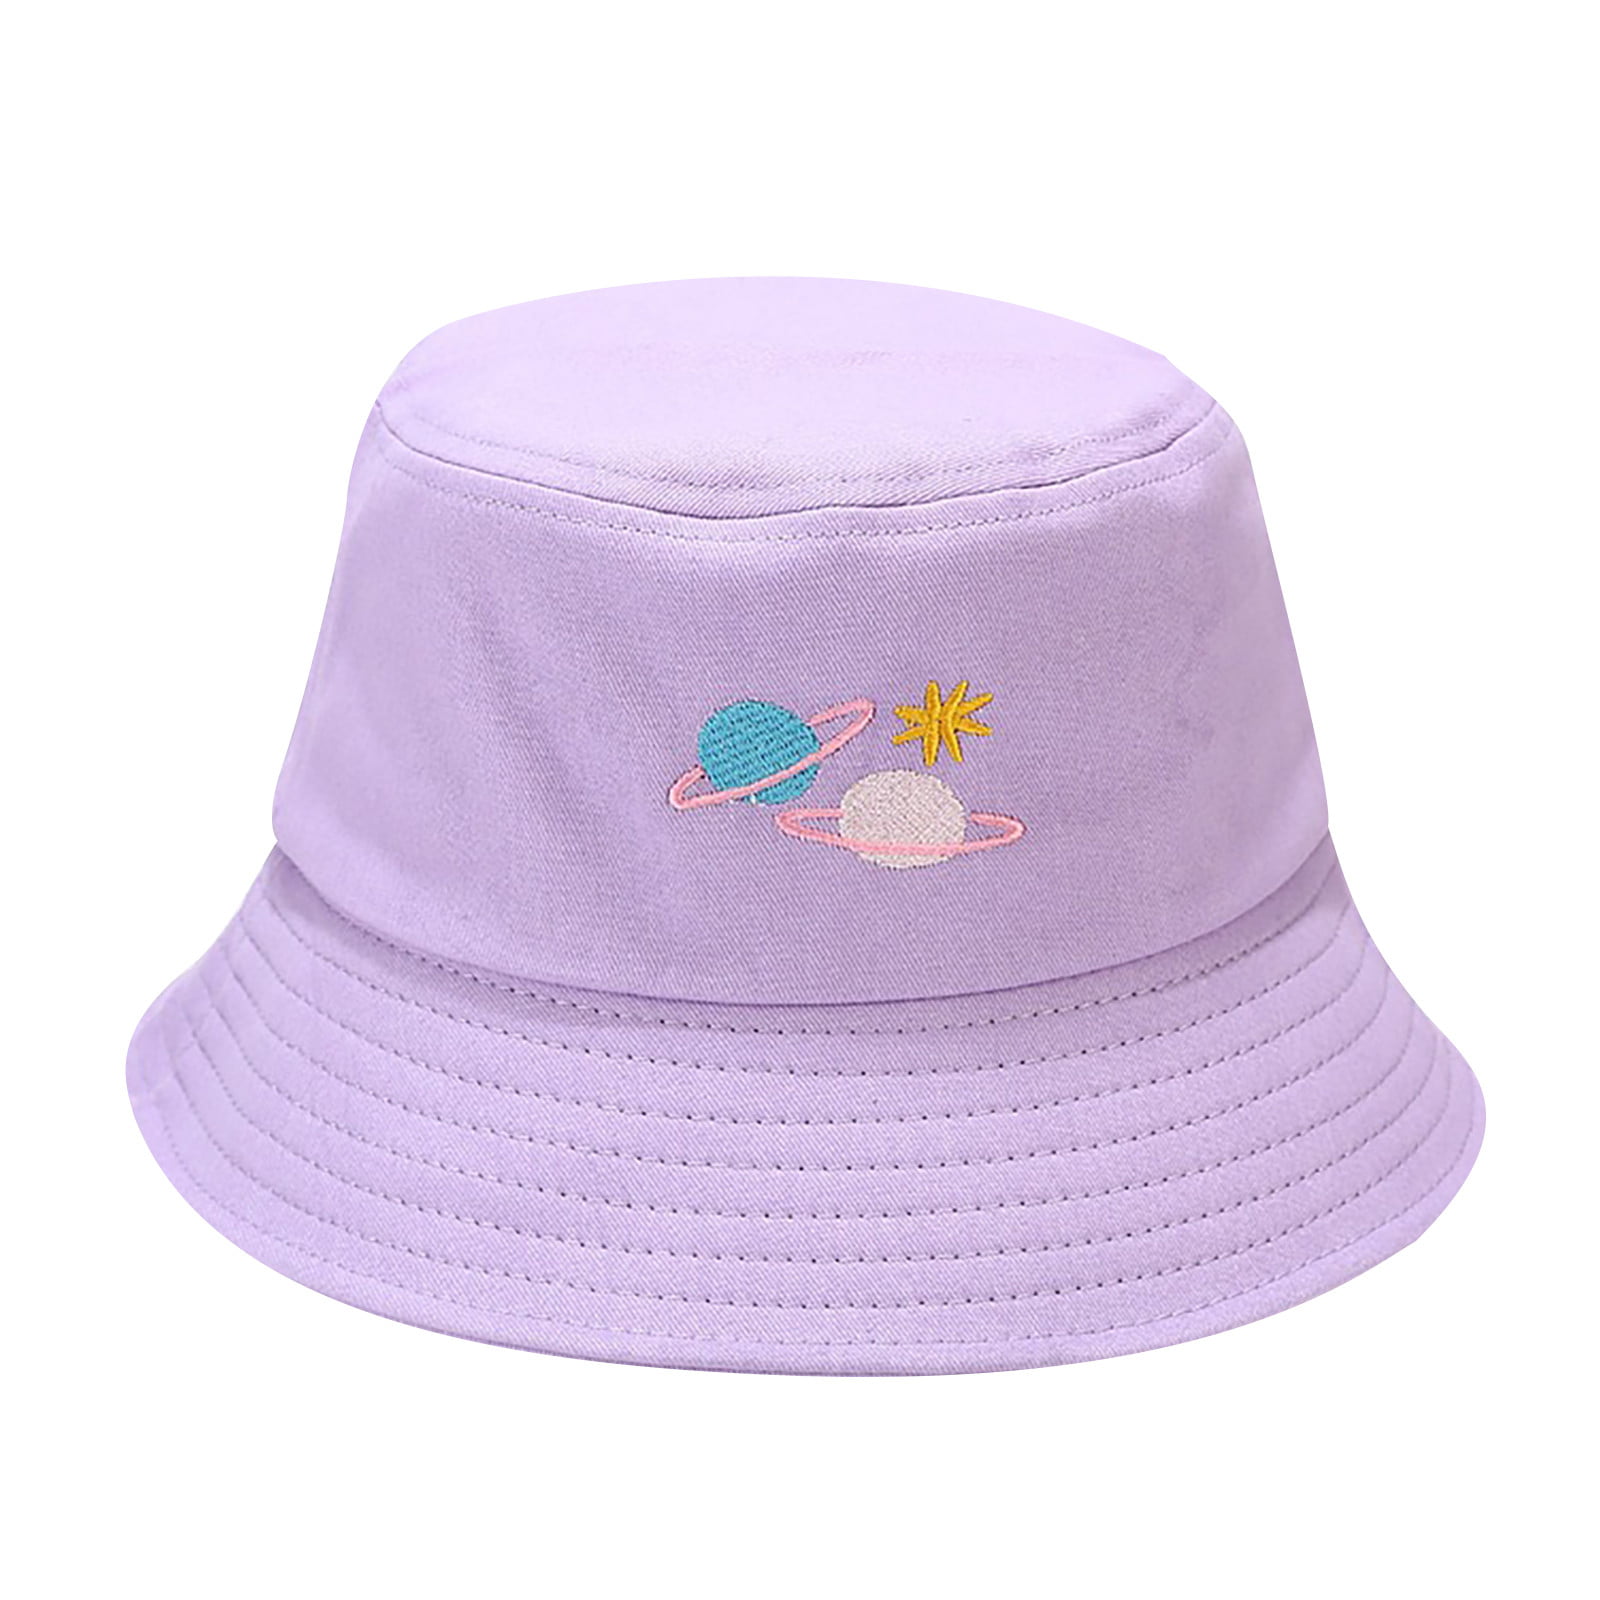 Teens Women and Men with Customize Top Packable Fisherman Cap for Outdoor Travel Purple Violet Lilac Flower New Summer Unisex Cotton Fashion Fishing Sun Bucket Hats for Kid 